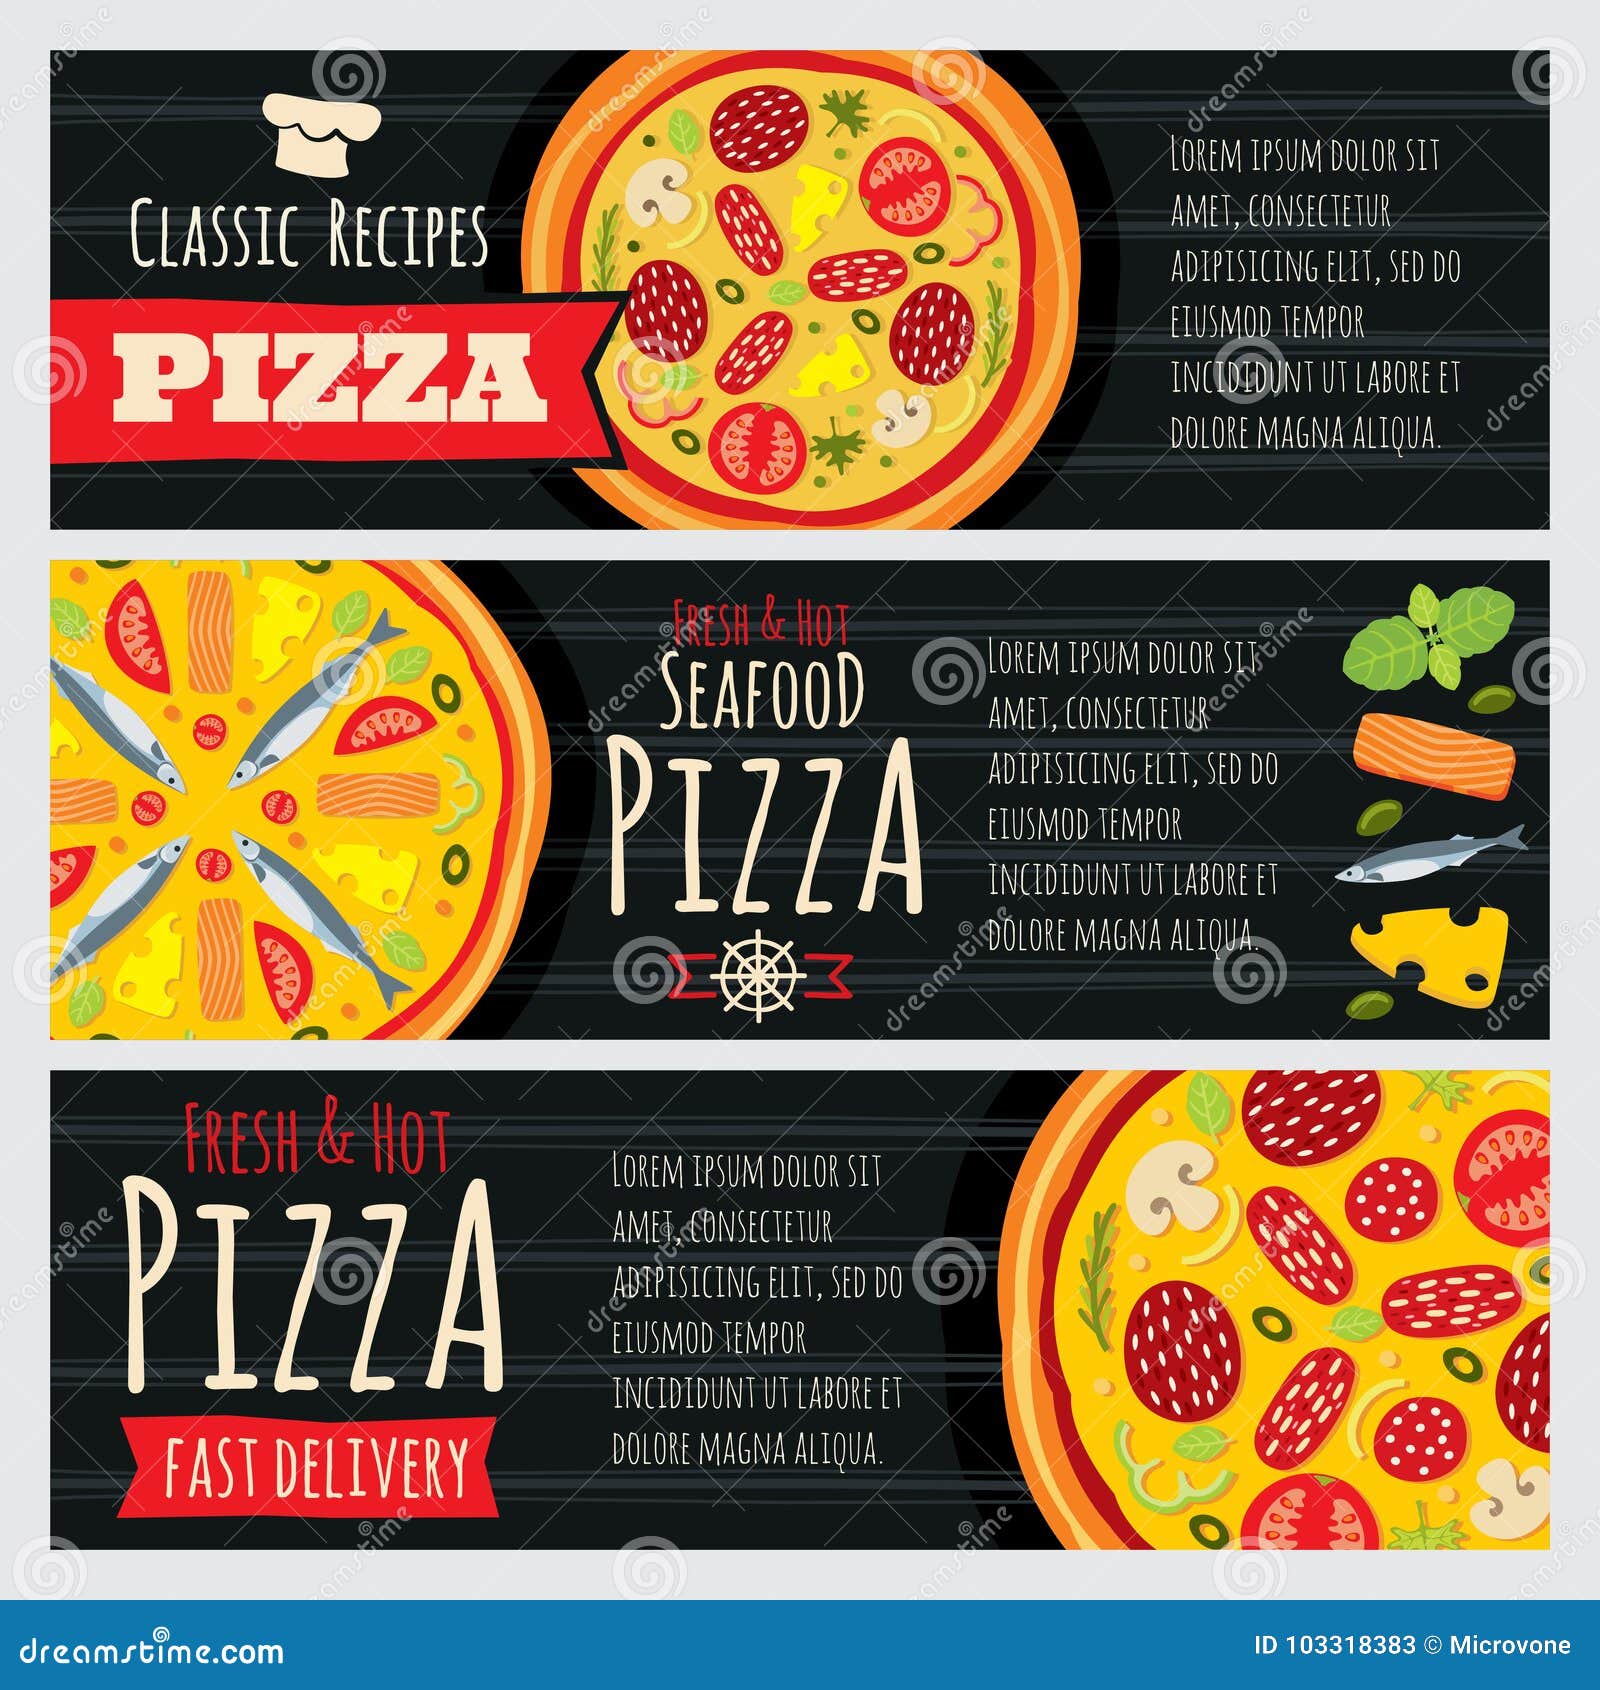 Italian Pizza And Pizzeria Restaurant Vector Horizontal Banners Stock Vector Illustration Of Element Graphic